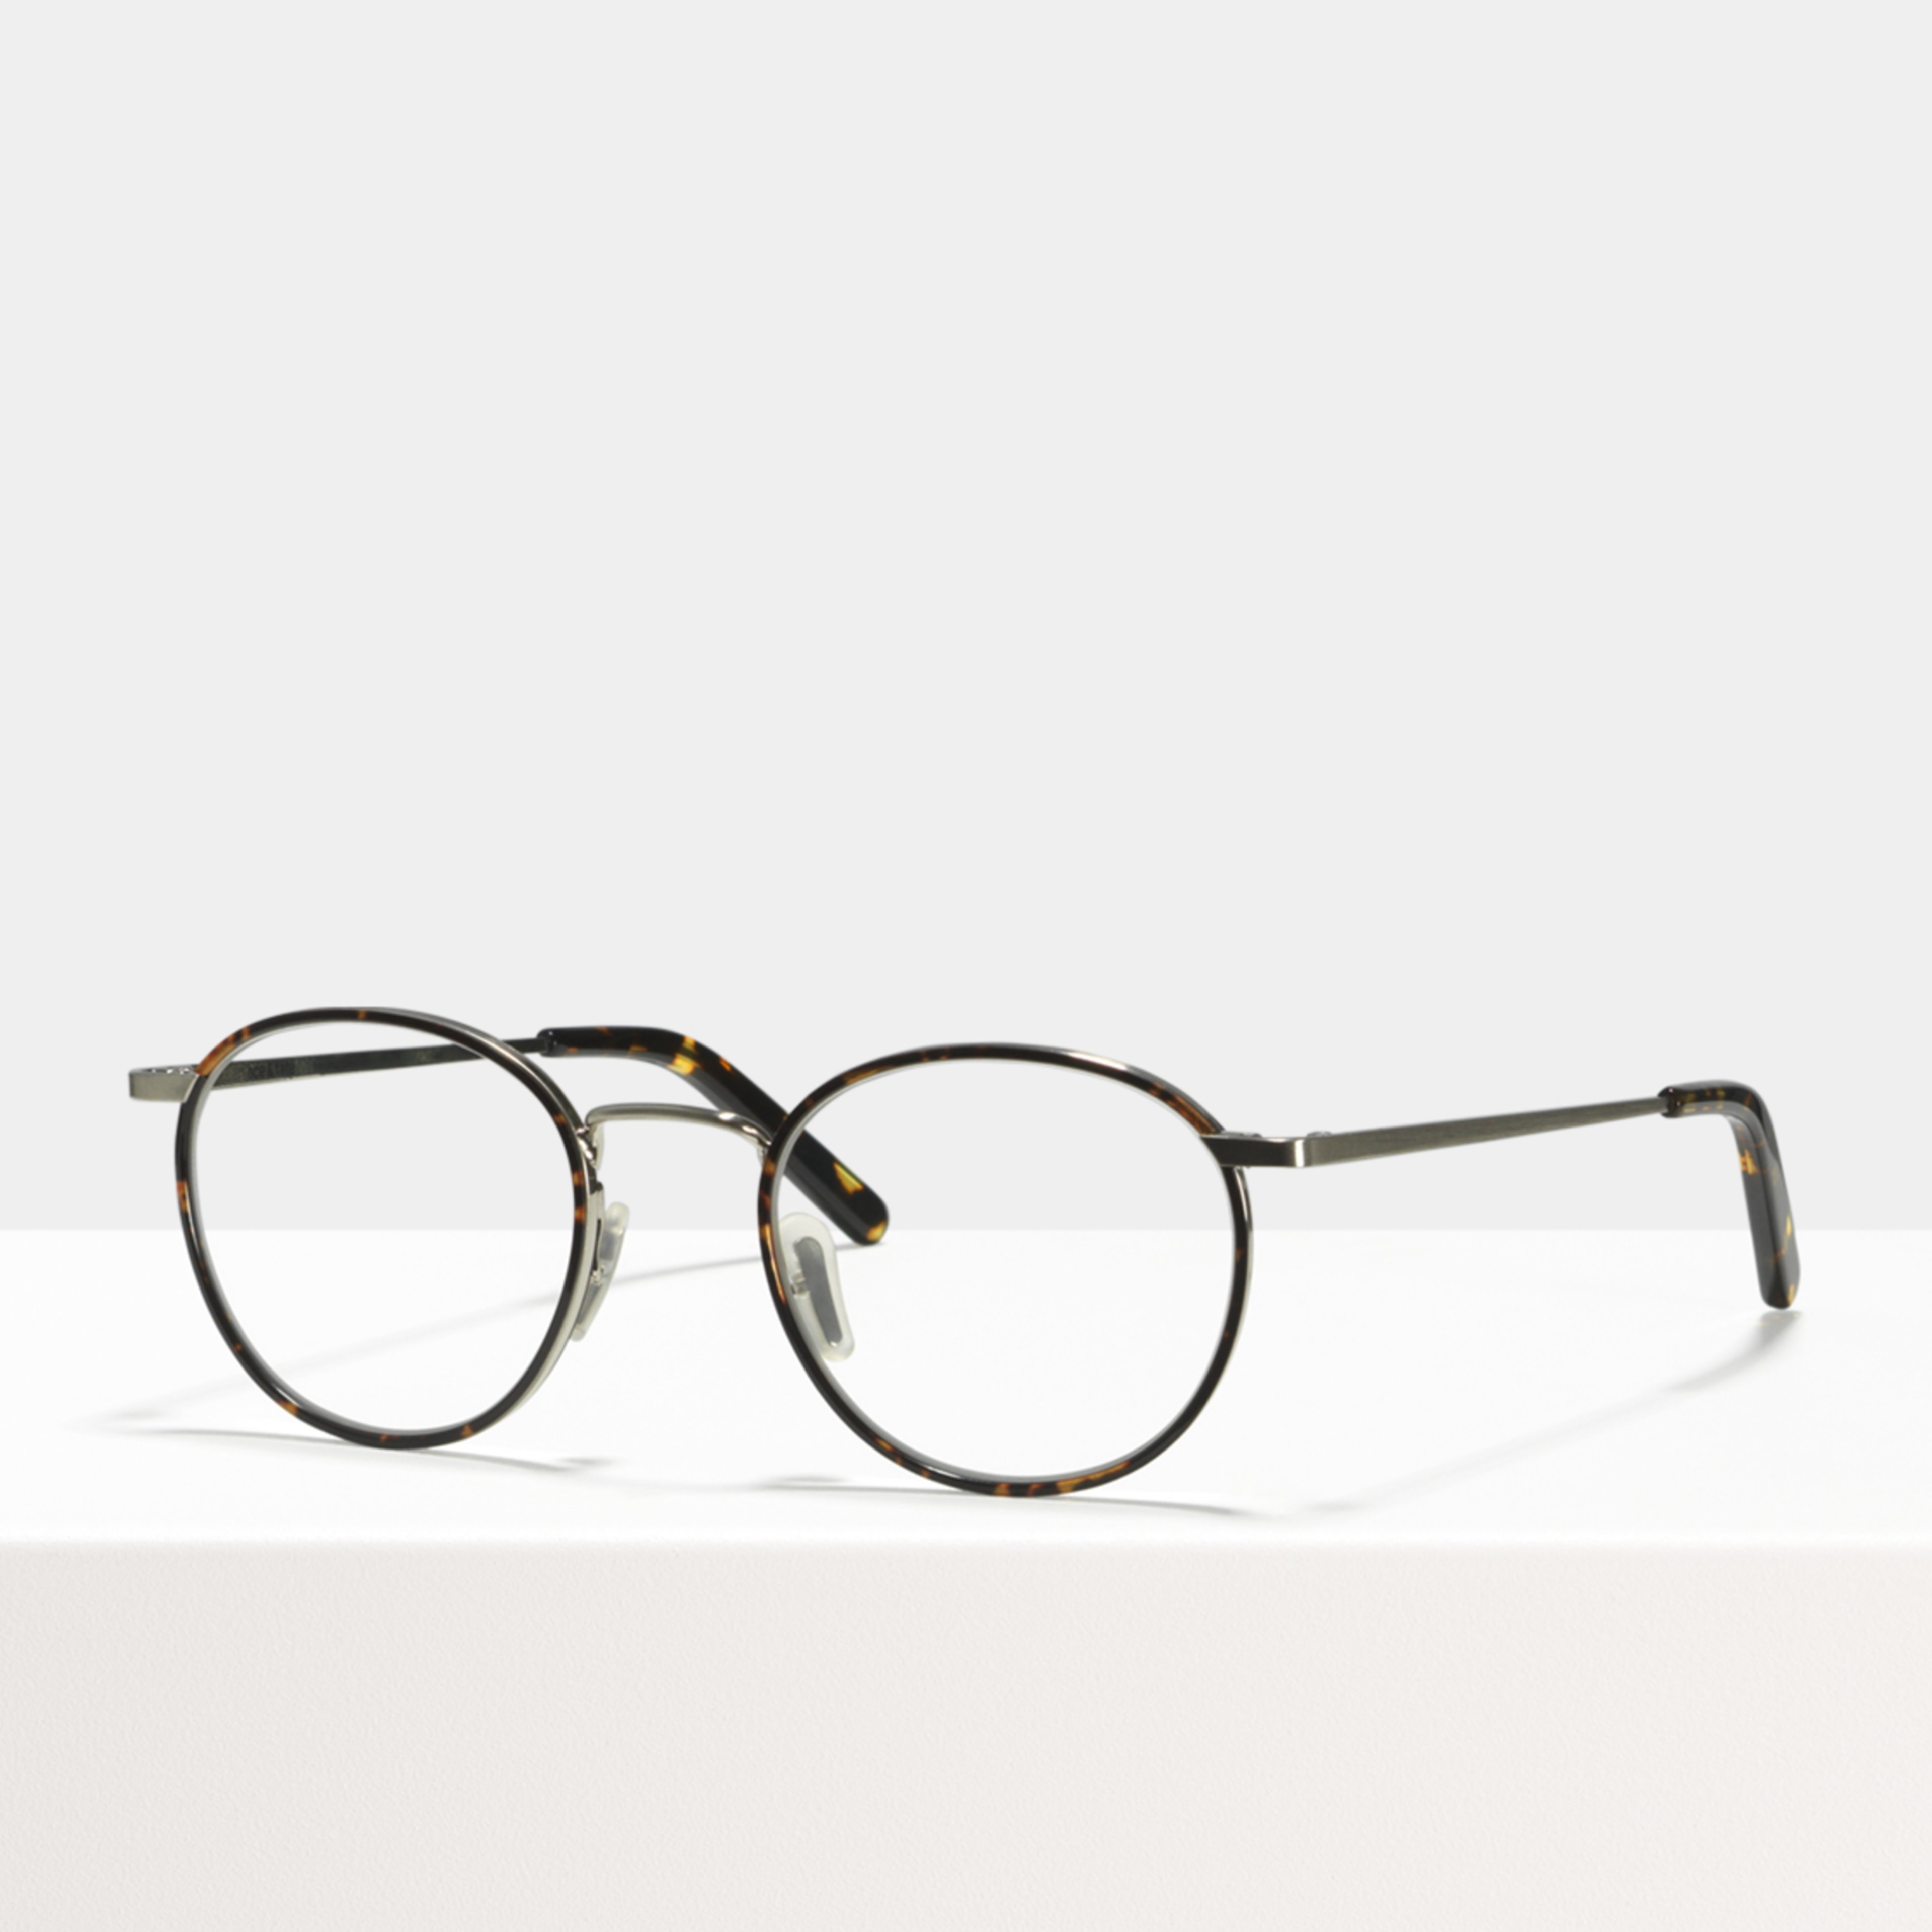 Ace & Tate Glasses | round metal in Brown, Orange, Silver